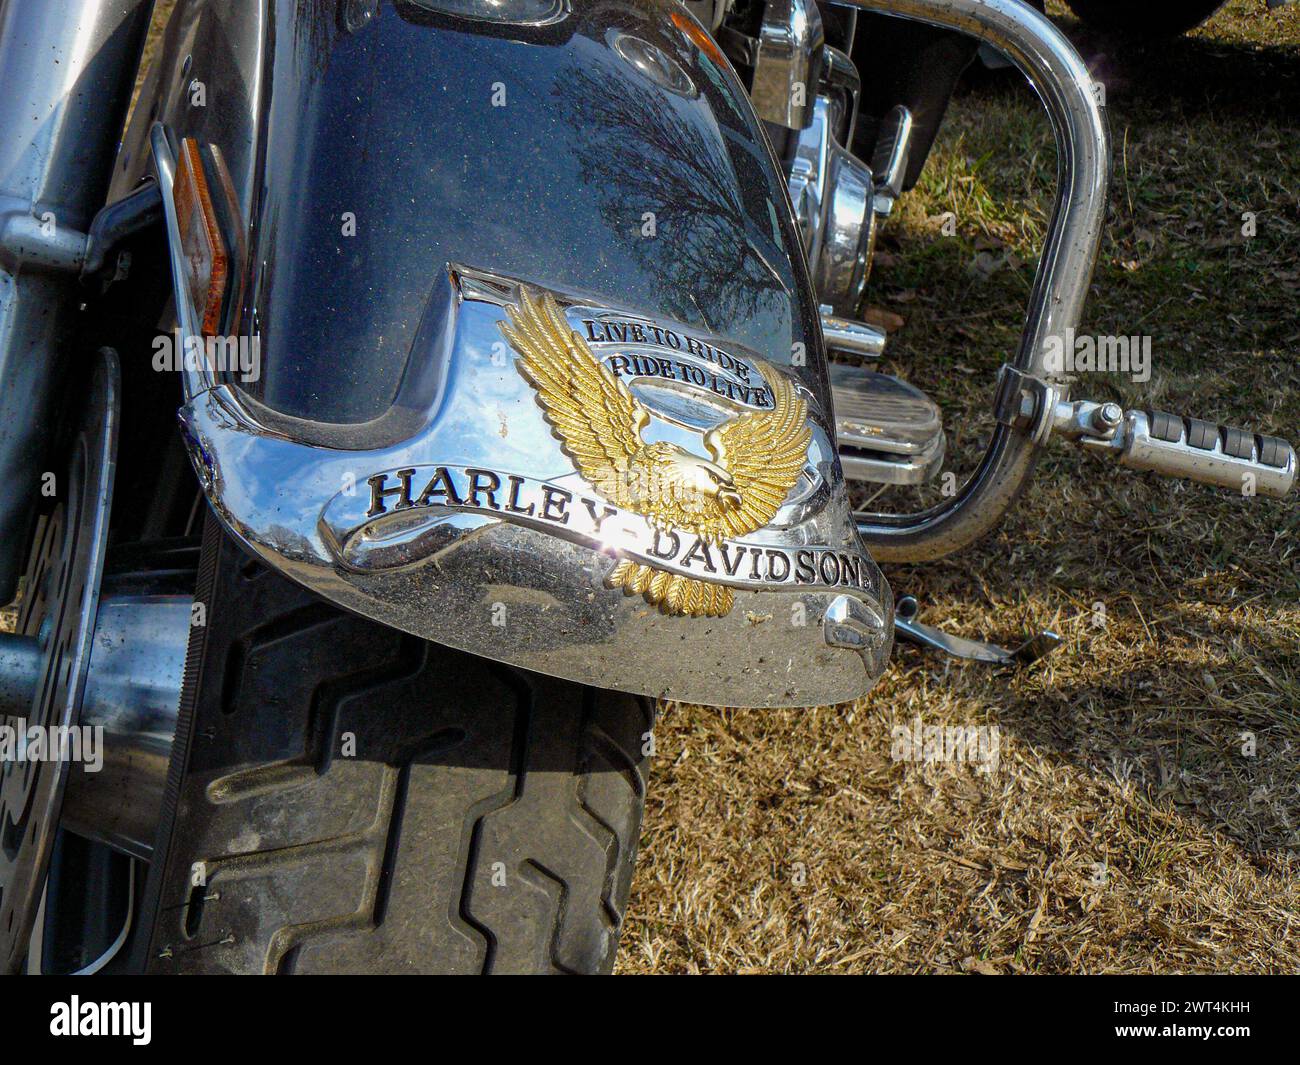 detail of the fender of a Harley Davidson motorcycle Stock Photo